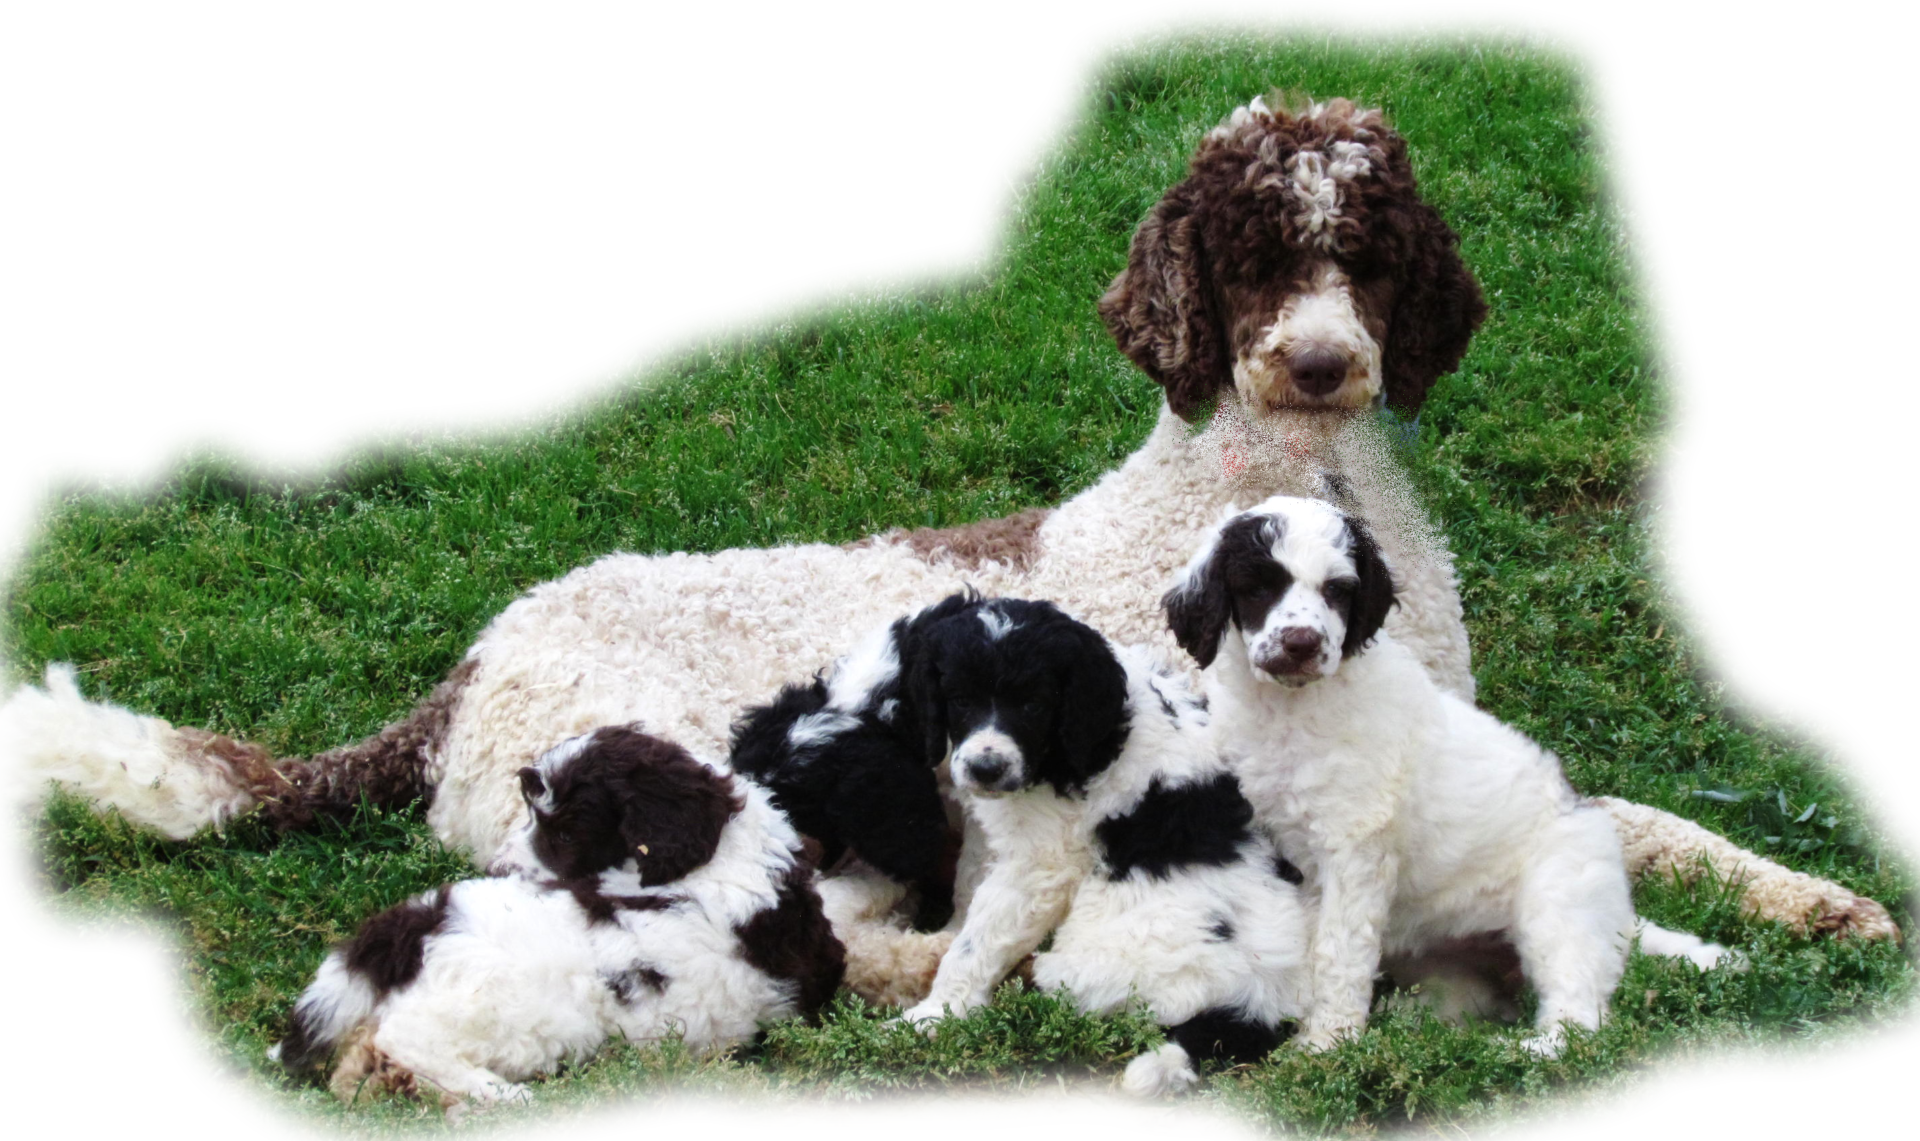 What is a solo standard poodle?